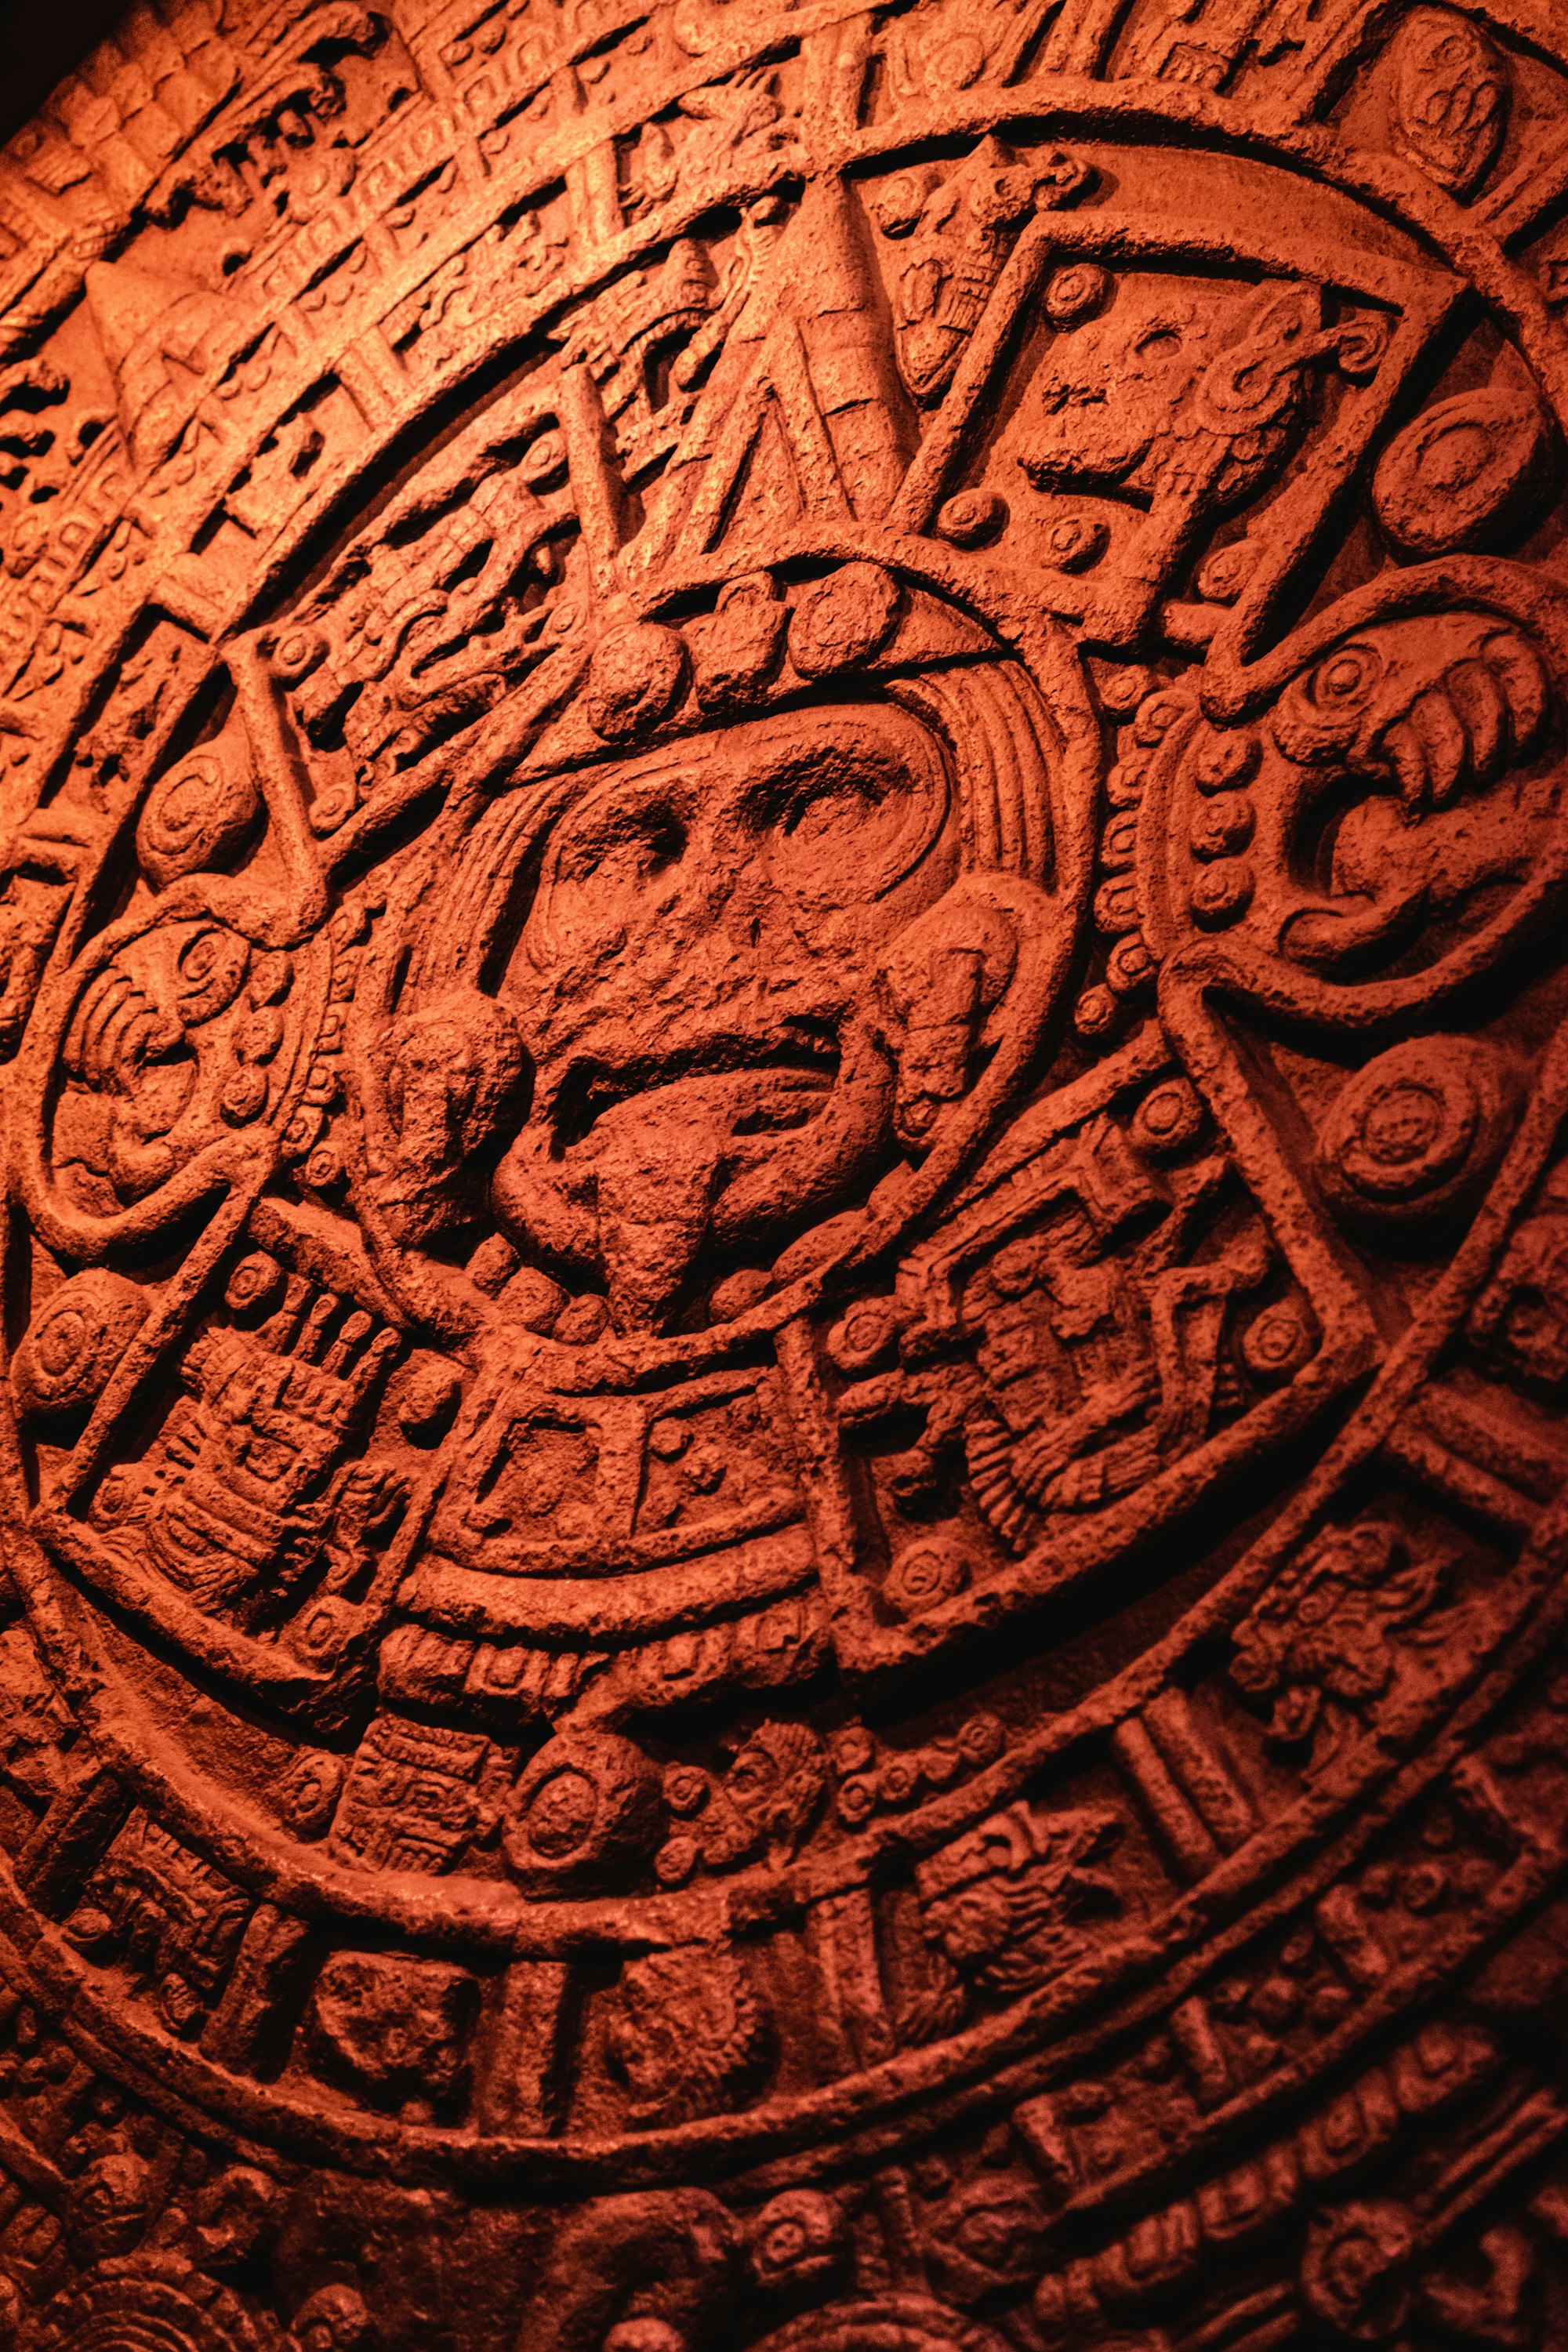 Modern-Day Conquistadors: The Decline of Nahuatl, and the Status of Mexican Bilingual Education